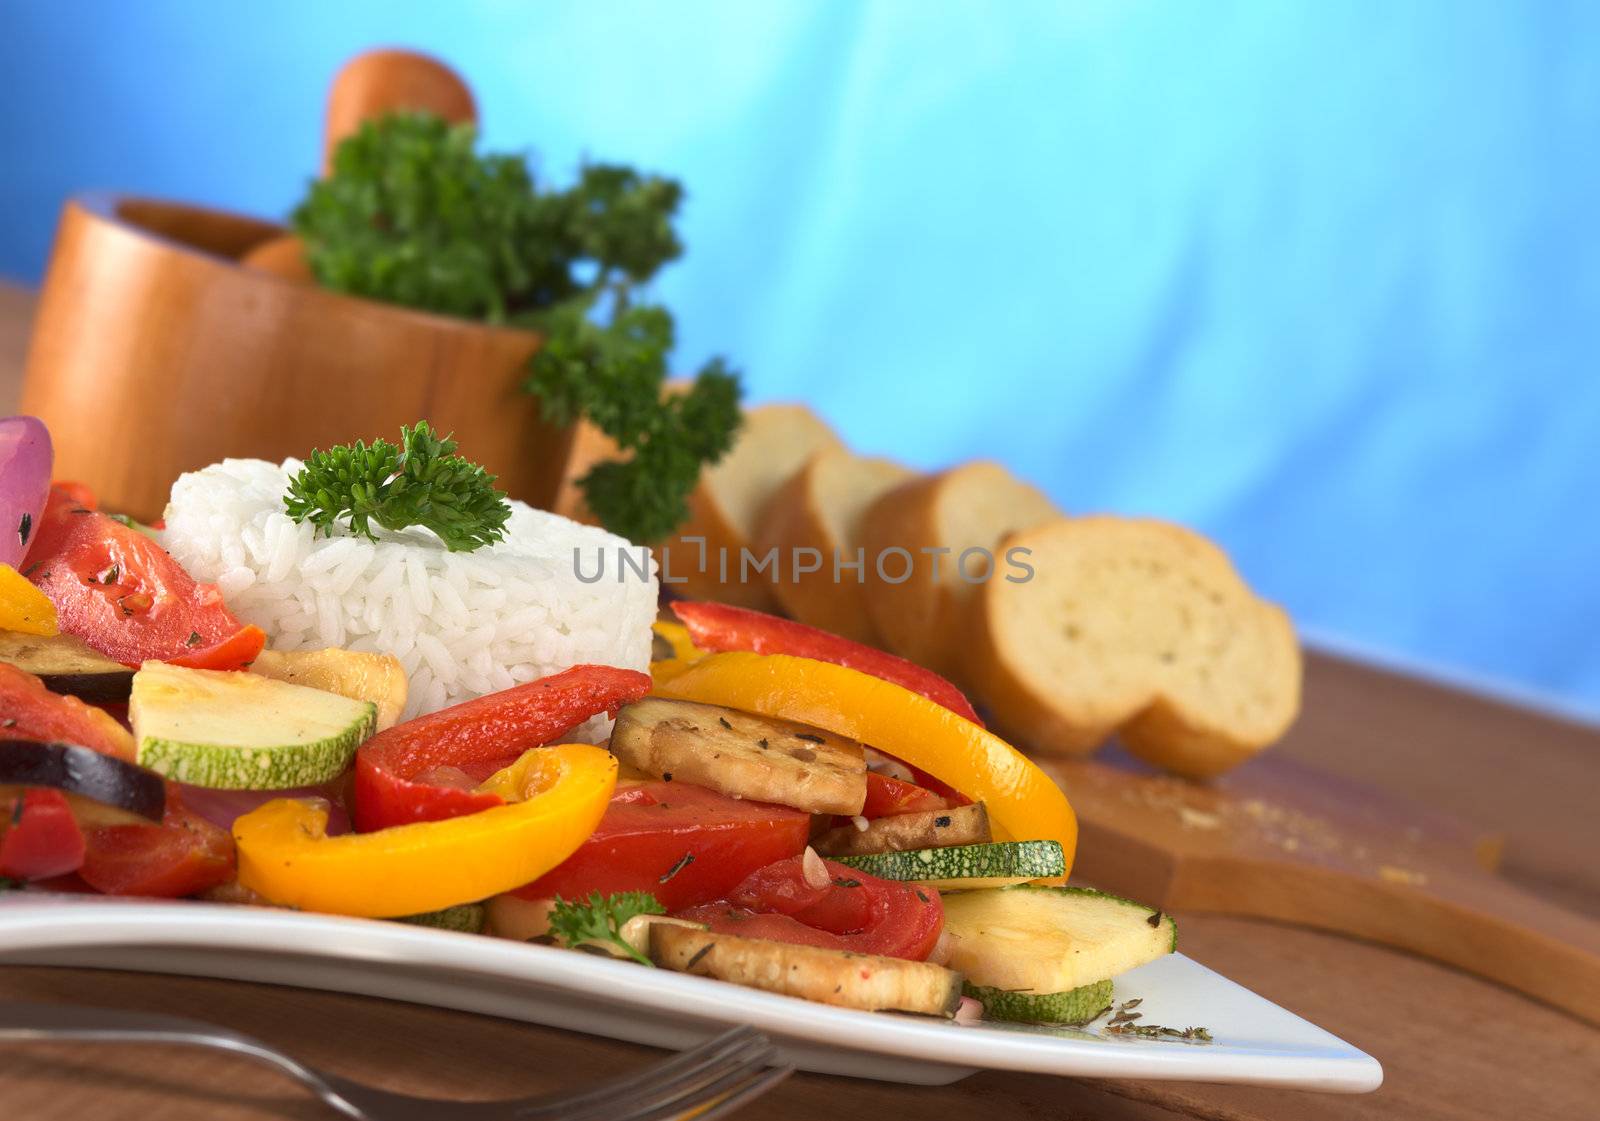 Ratatouille of zucchini, eggplant, tomato, bell pepper and onion with cooked rice and mortar with herbs and baguette in the back (Selective Focus, Focus on the front of the rice, the parsley on top and the vegetable around)